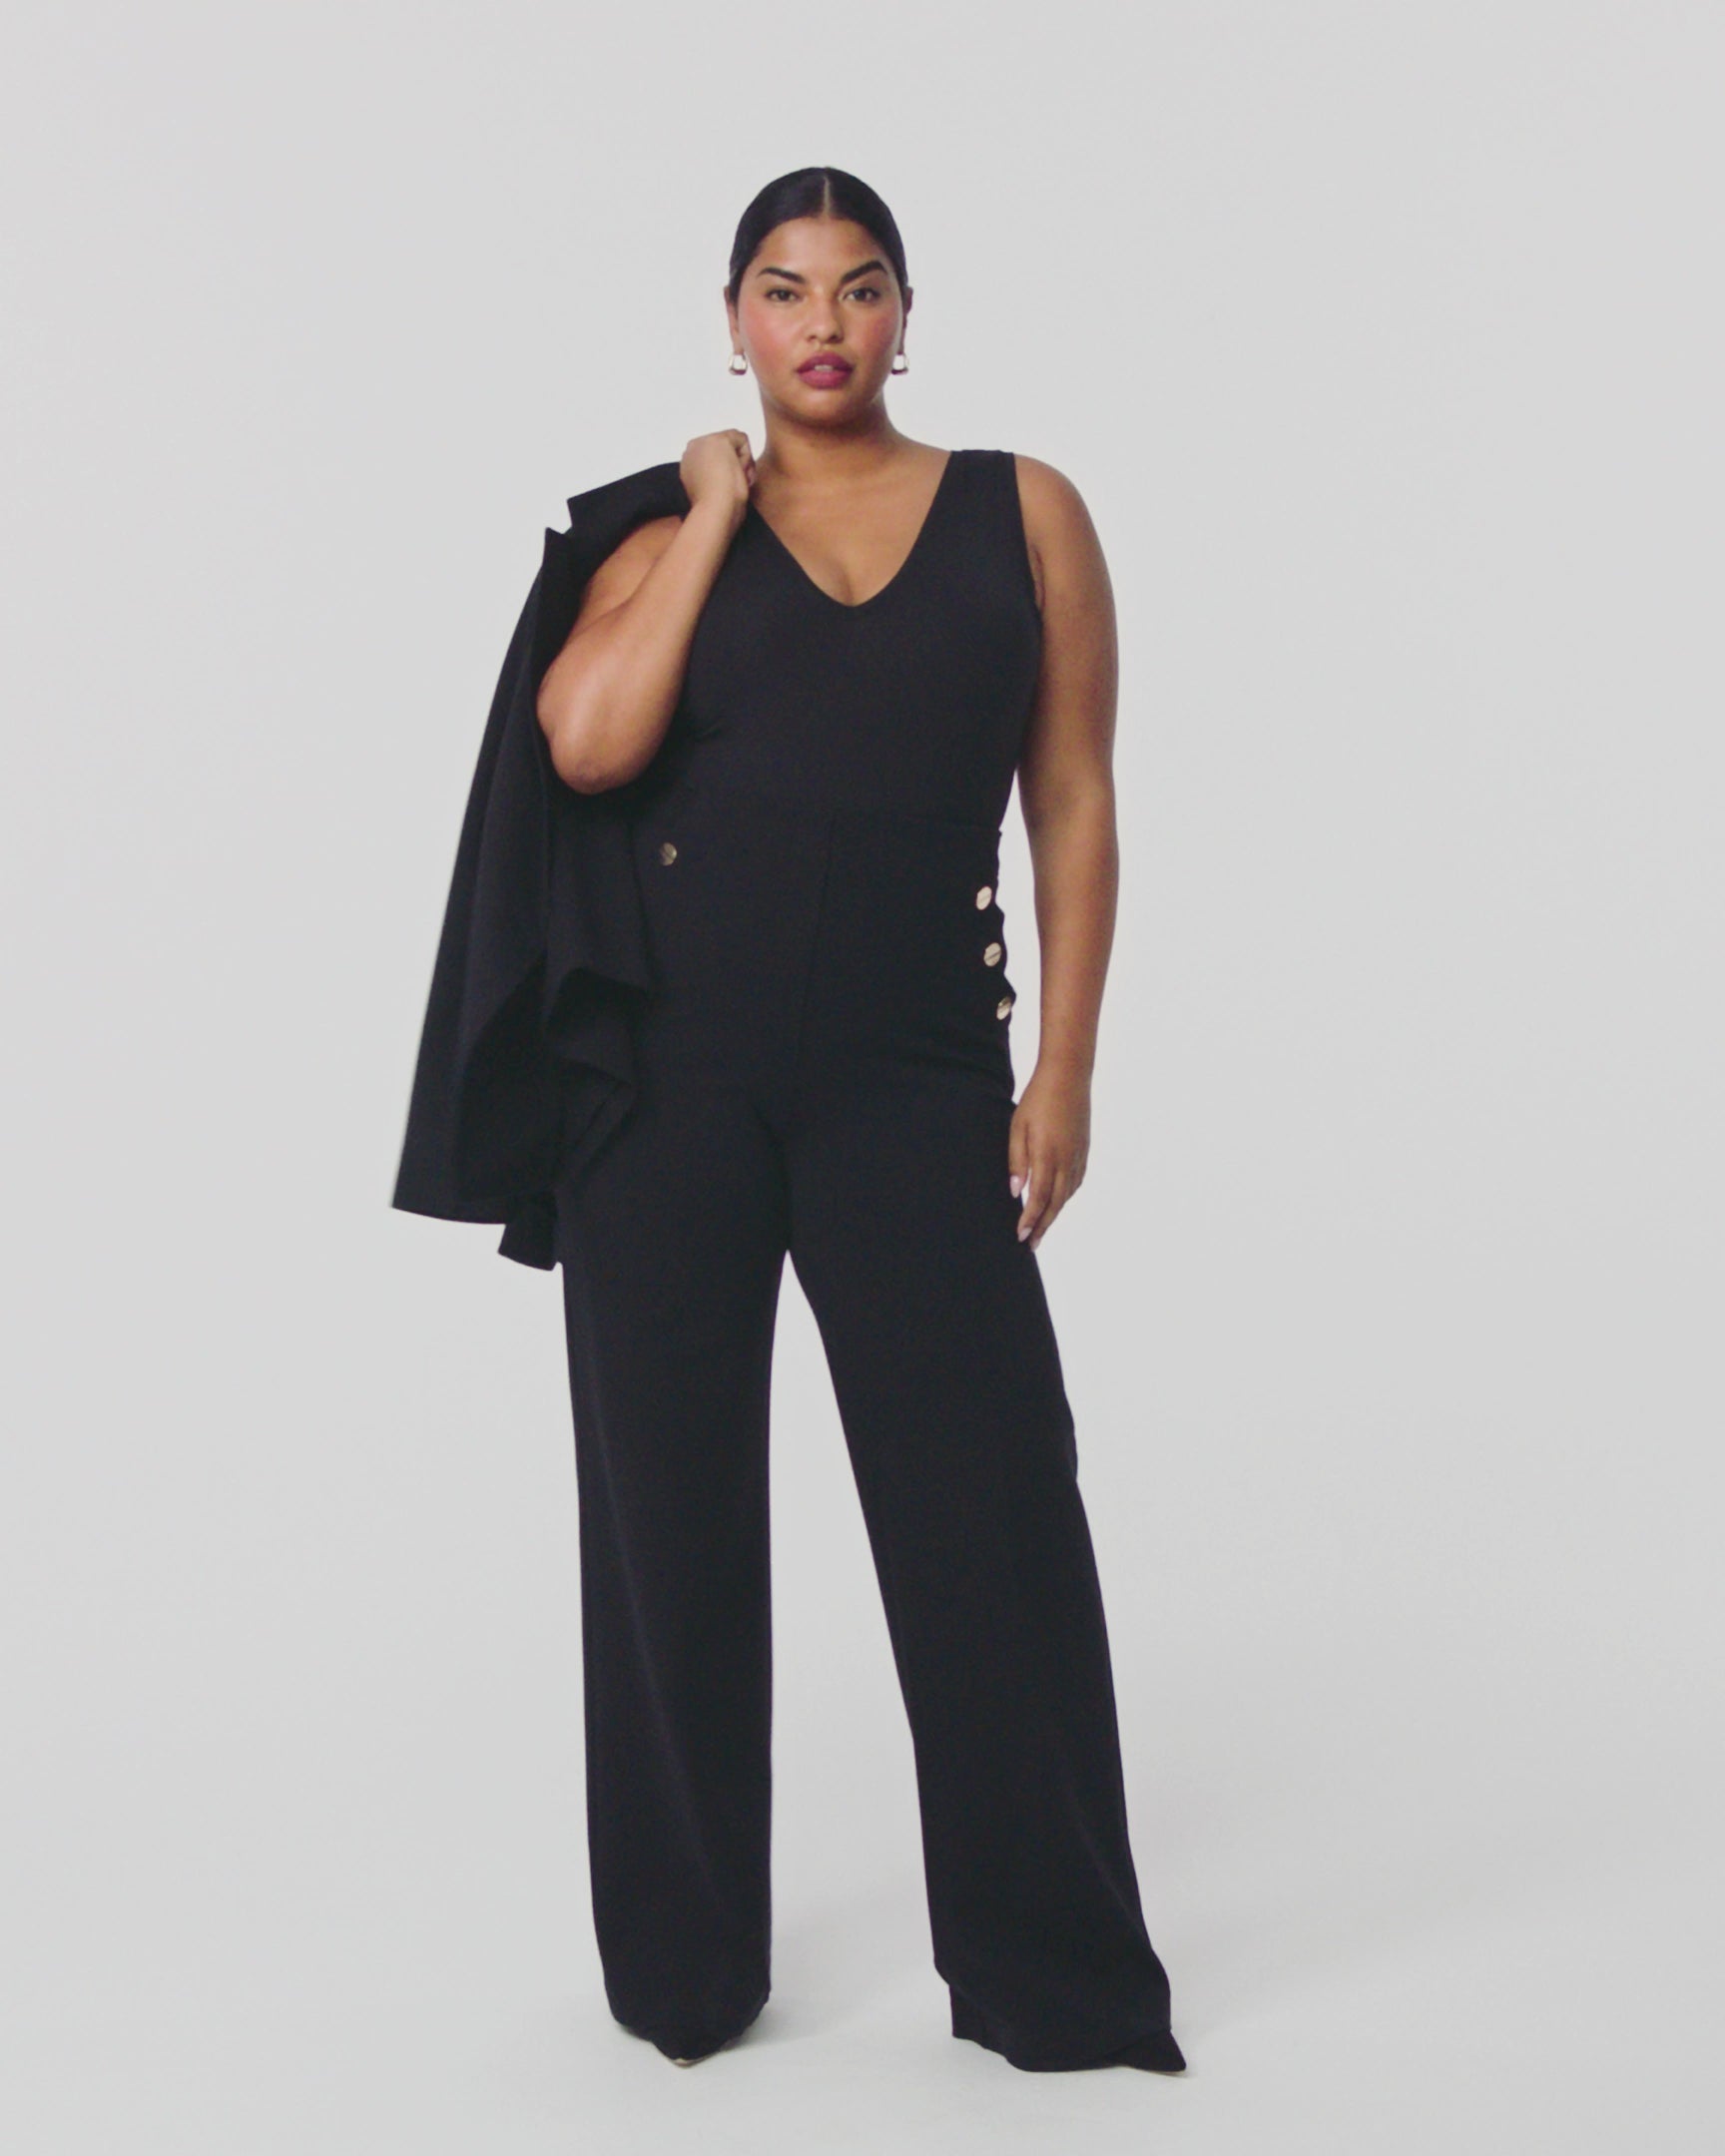 SPANX - WORK IT in our Perfect Pant Hi-Rise Flare! These are the *perfect*  pants to take you from morning meetings to happy hour! #perfectpant #Spanx  #workwear Shop the Perfect Pant Hi-Rise